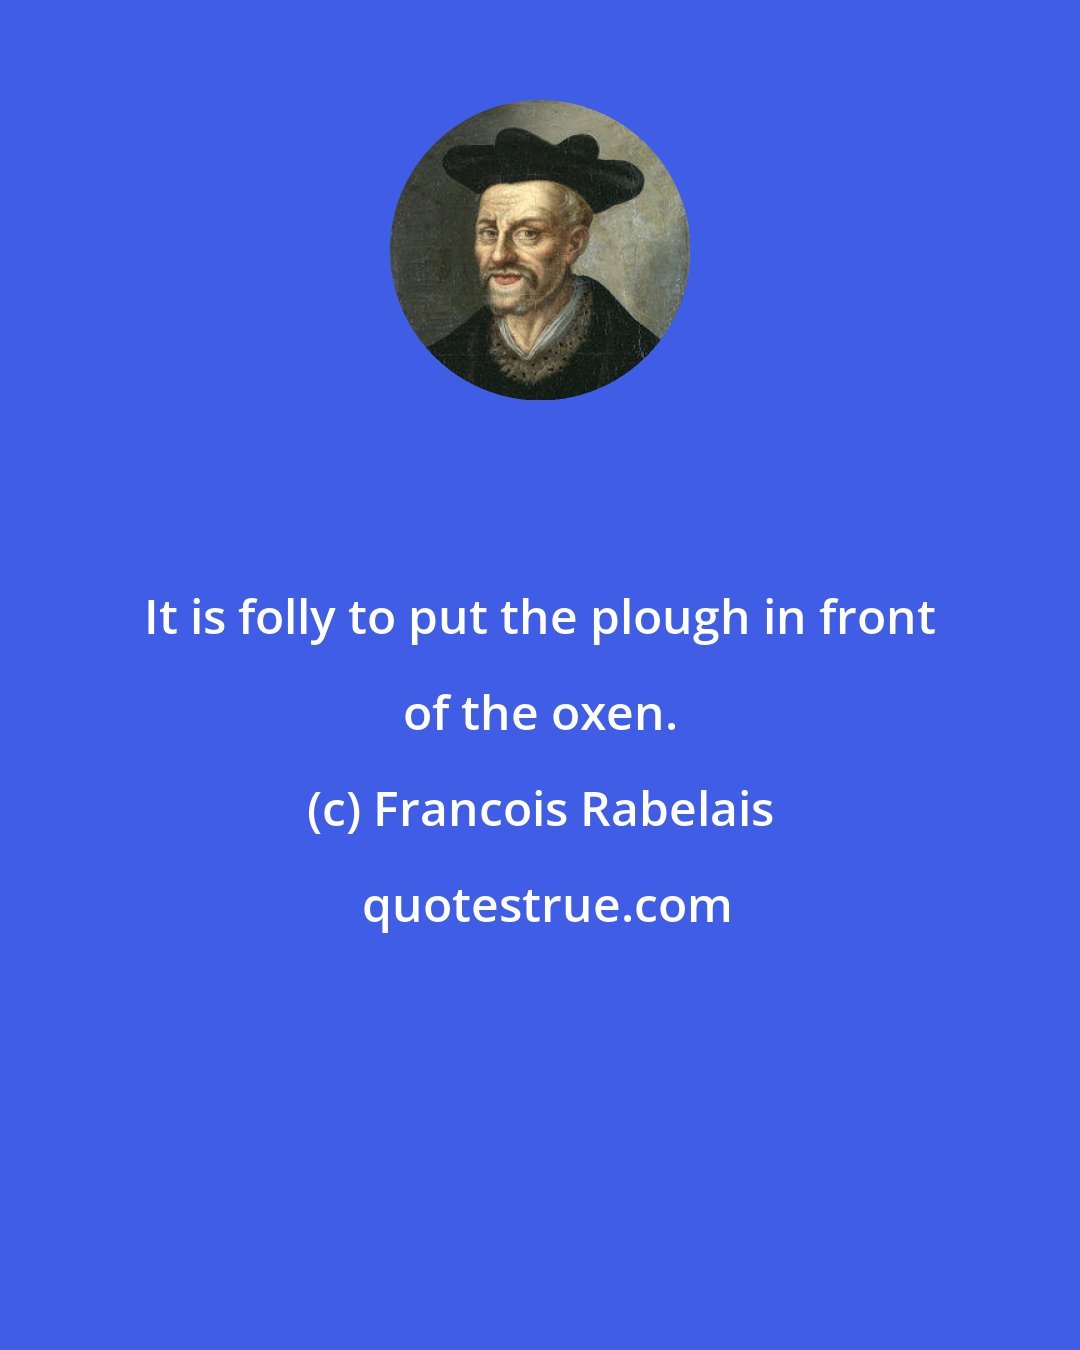 Francois Rabelais: It is folly to put the plough in front of the oxen.